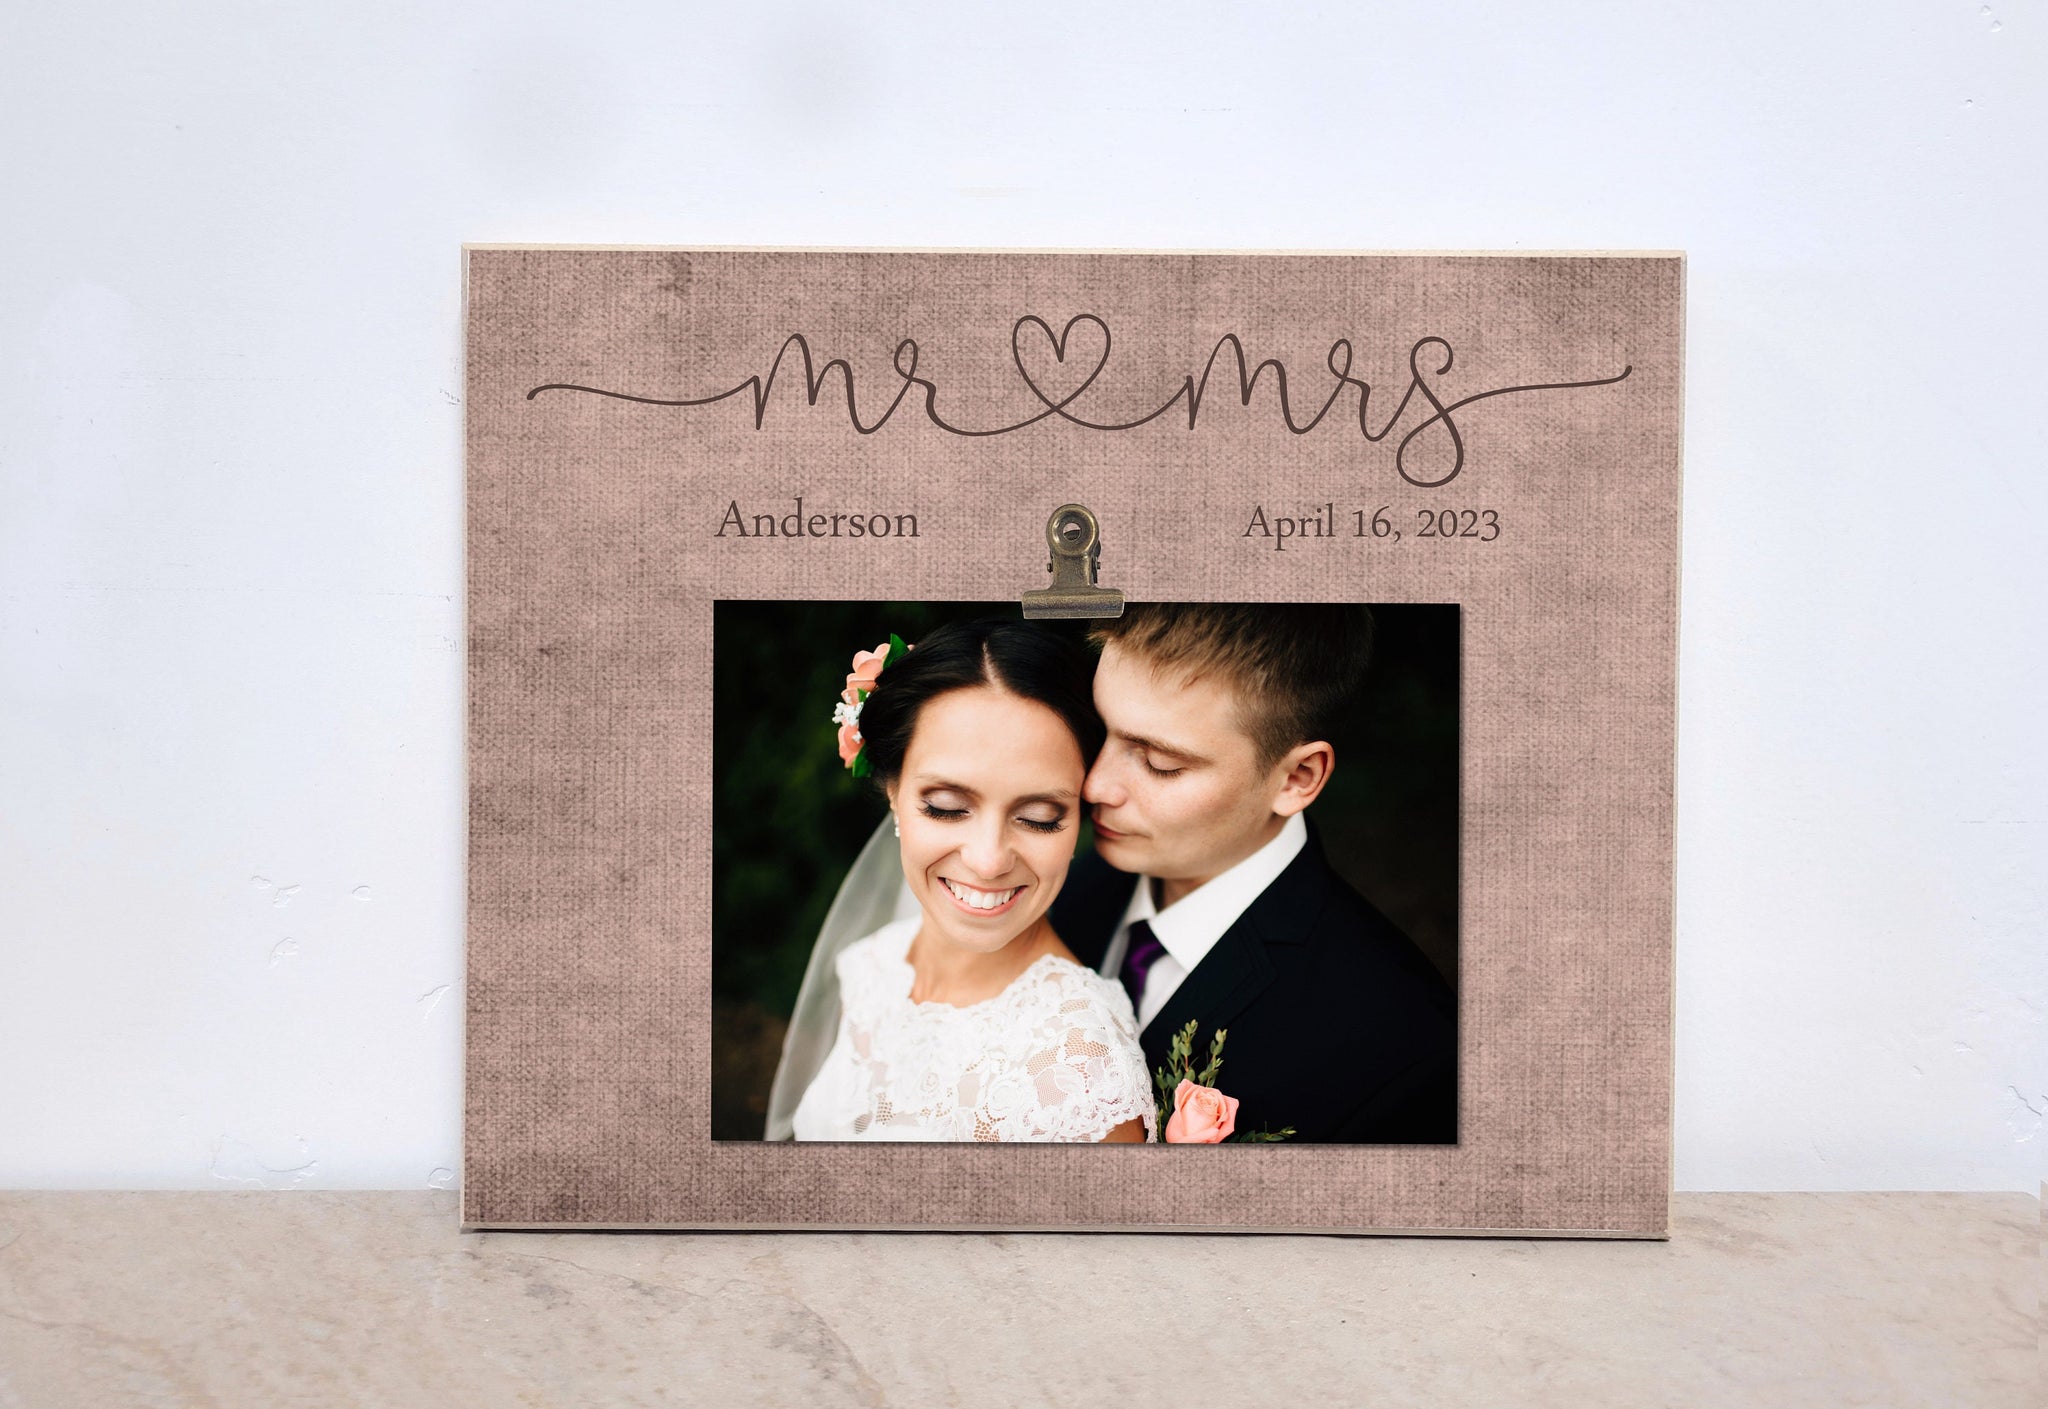 Anniversary Photo Frame | Buy Marriage Photo Frames Online